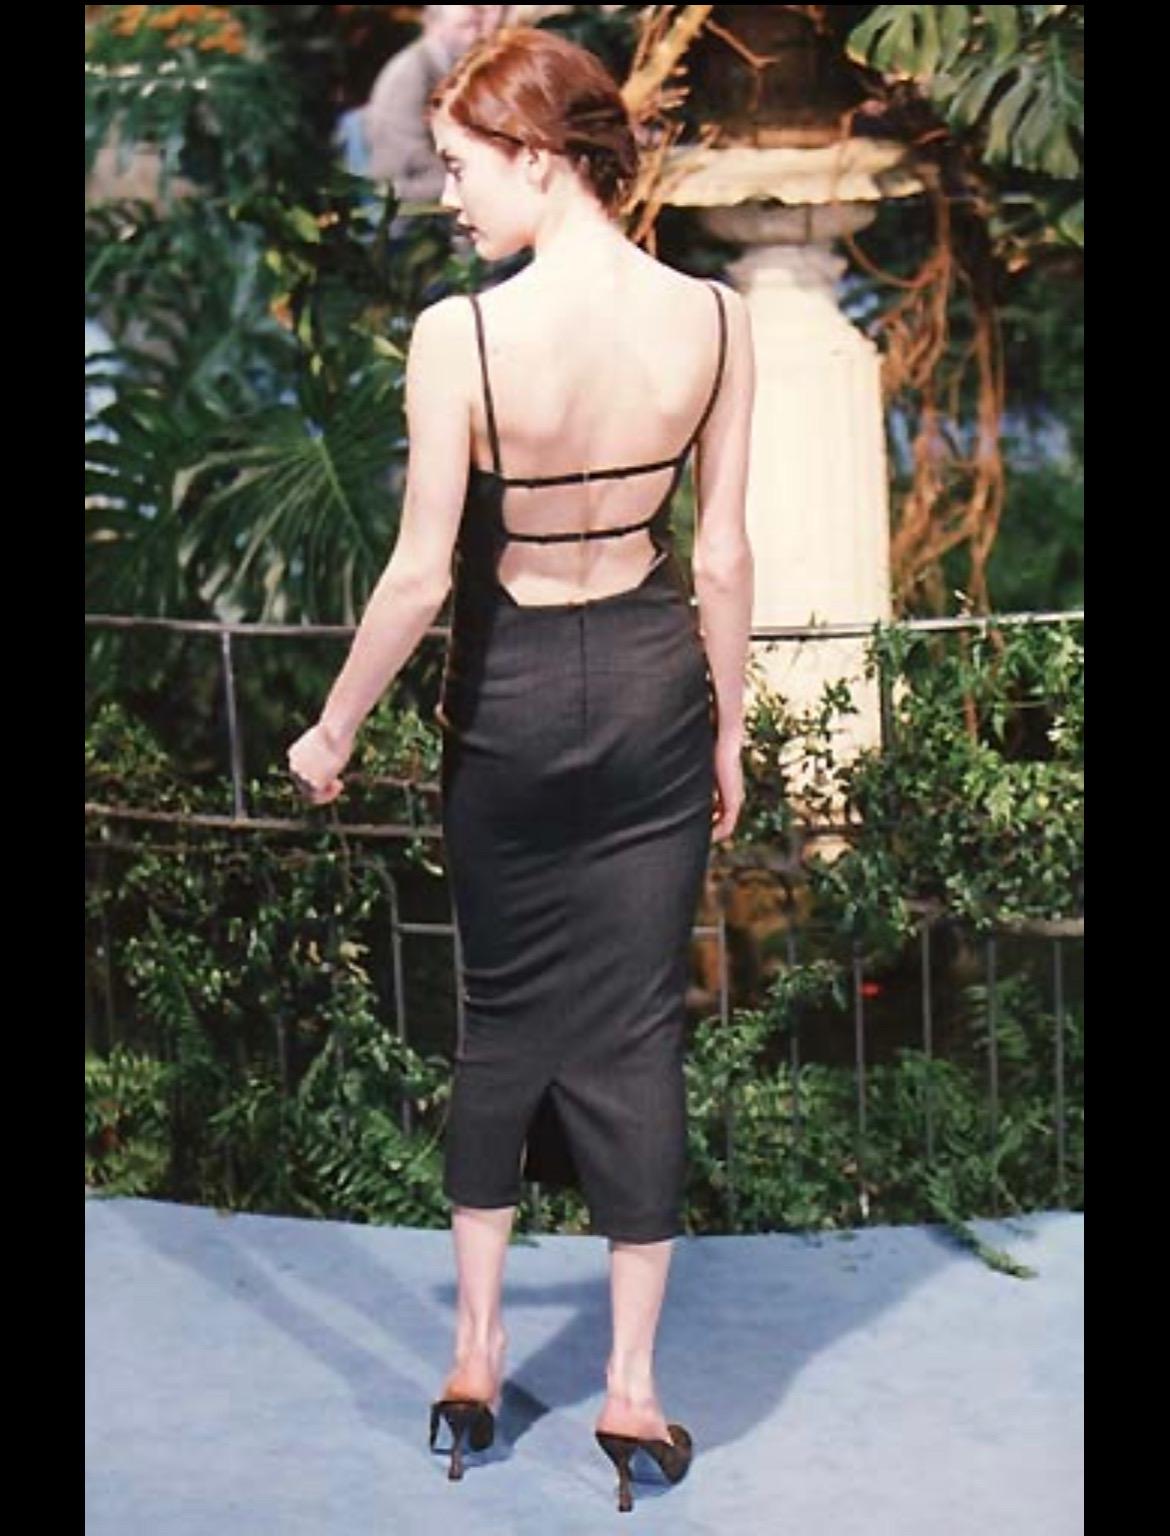 F/W 1998 Dolce & Gabbana Black Sleeveless Backless Runway Dress In Excellent Condition For Sale In West Hollywood, CA